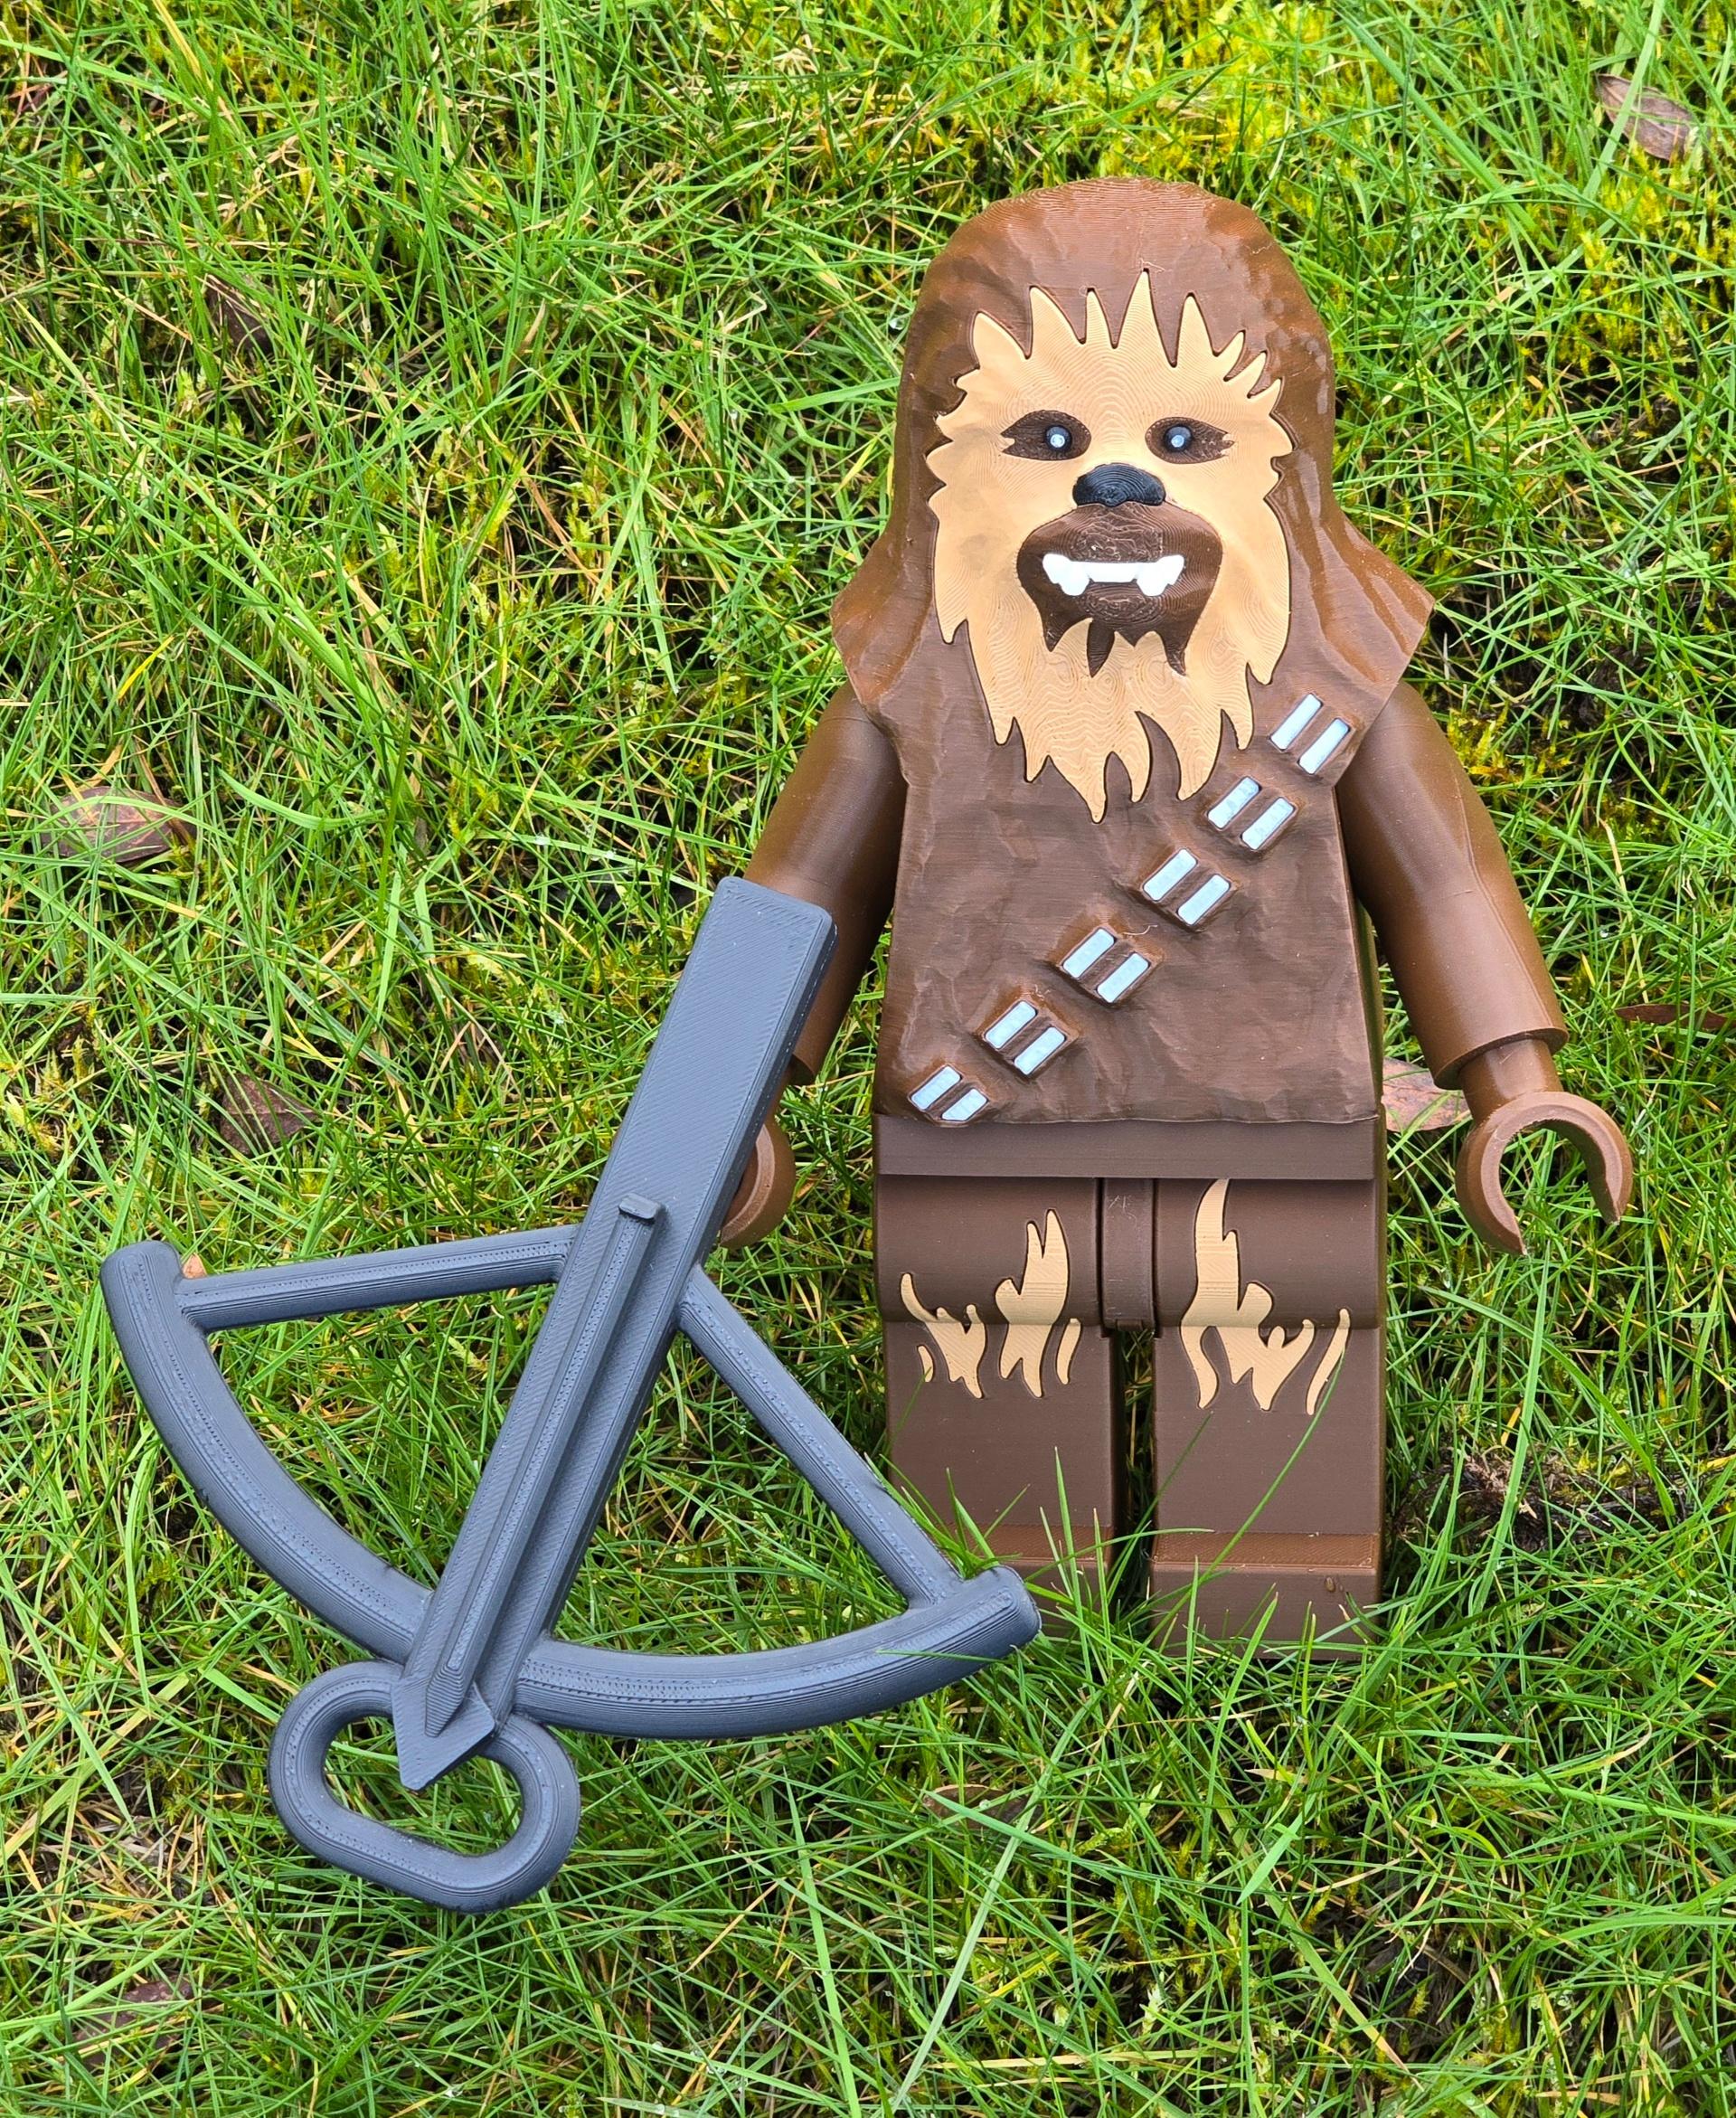 Chewbacca (6:1 LEGO-inspired brick figure, NO MMU/AMS, NO supports, NO glue) - Large 3D printed Star Wars LEGO Chewie came directly from Kashyyyk to say: "Raaaaaghur!" - 3d model